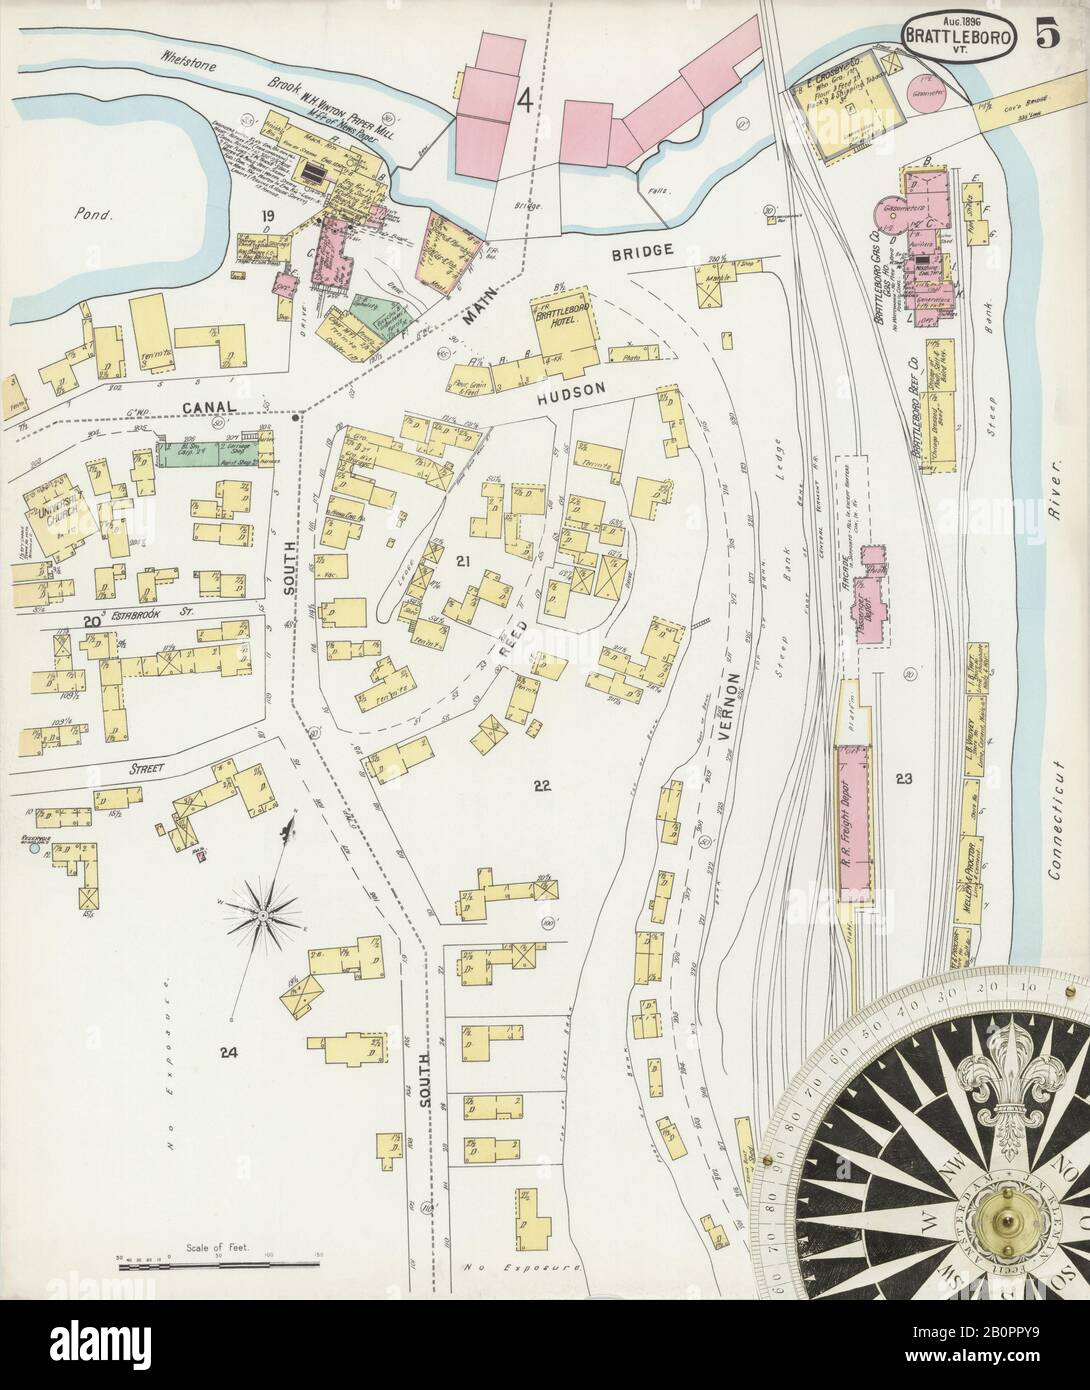 Image 5 of Sanborn Fire Insurance Map from Brattleboro, Windham County, Vermont. Aug 1896. 8 Sheet(s), America, street map with a Nineteenth Century compass Stock Photo